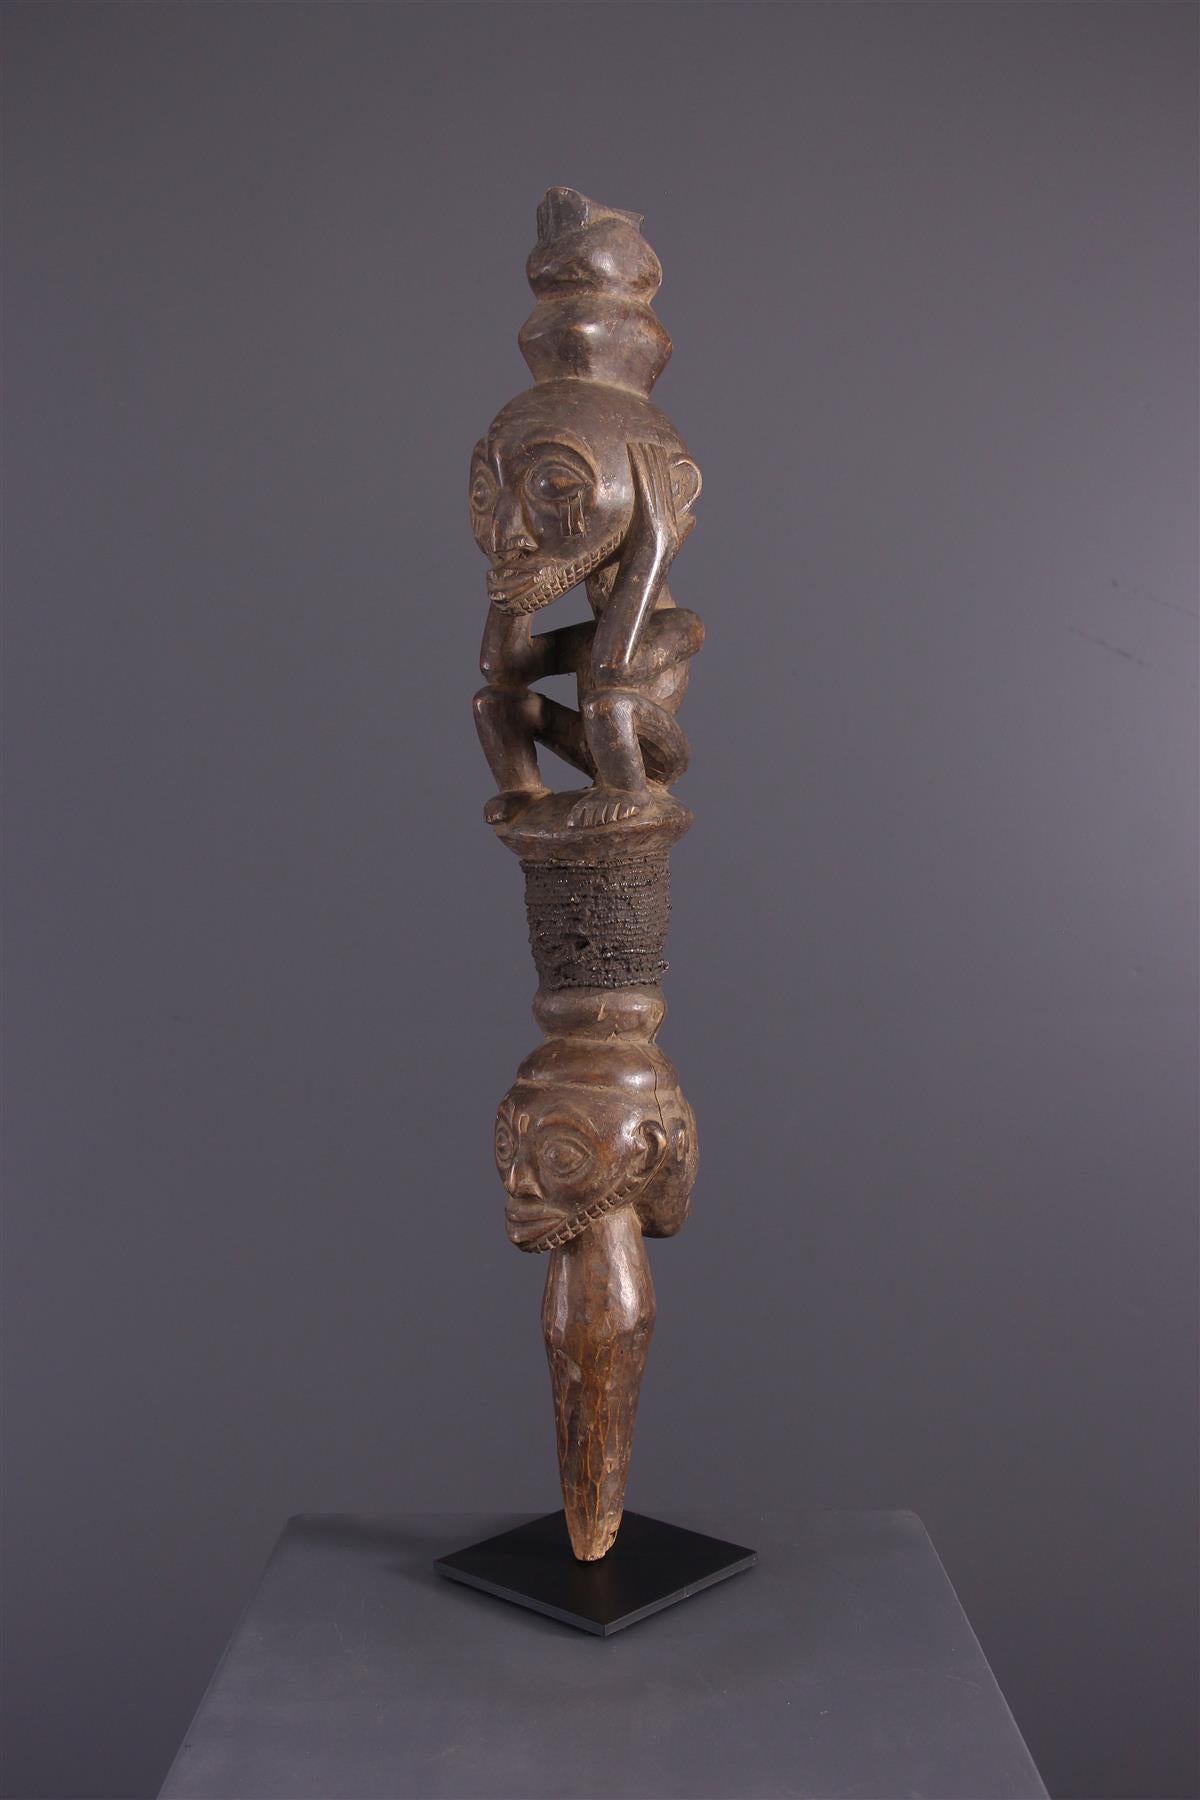 Kusu command rod
This prestigious staff among chieftain regalia is composed of different carved sections that form an iconographic language related to the history of the ancestor or his clan, like the kibangos of the Luba. 
Wrapped around the